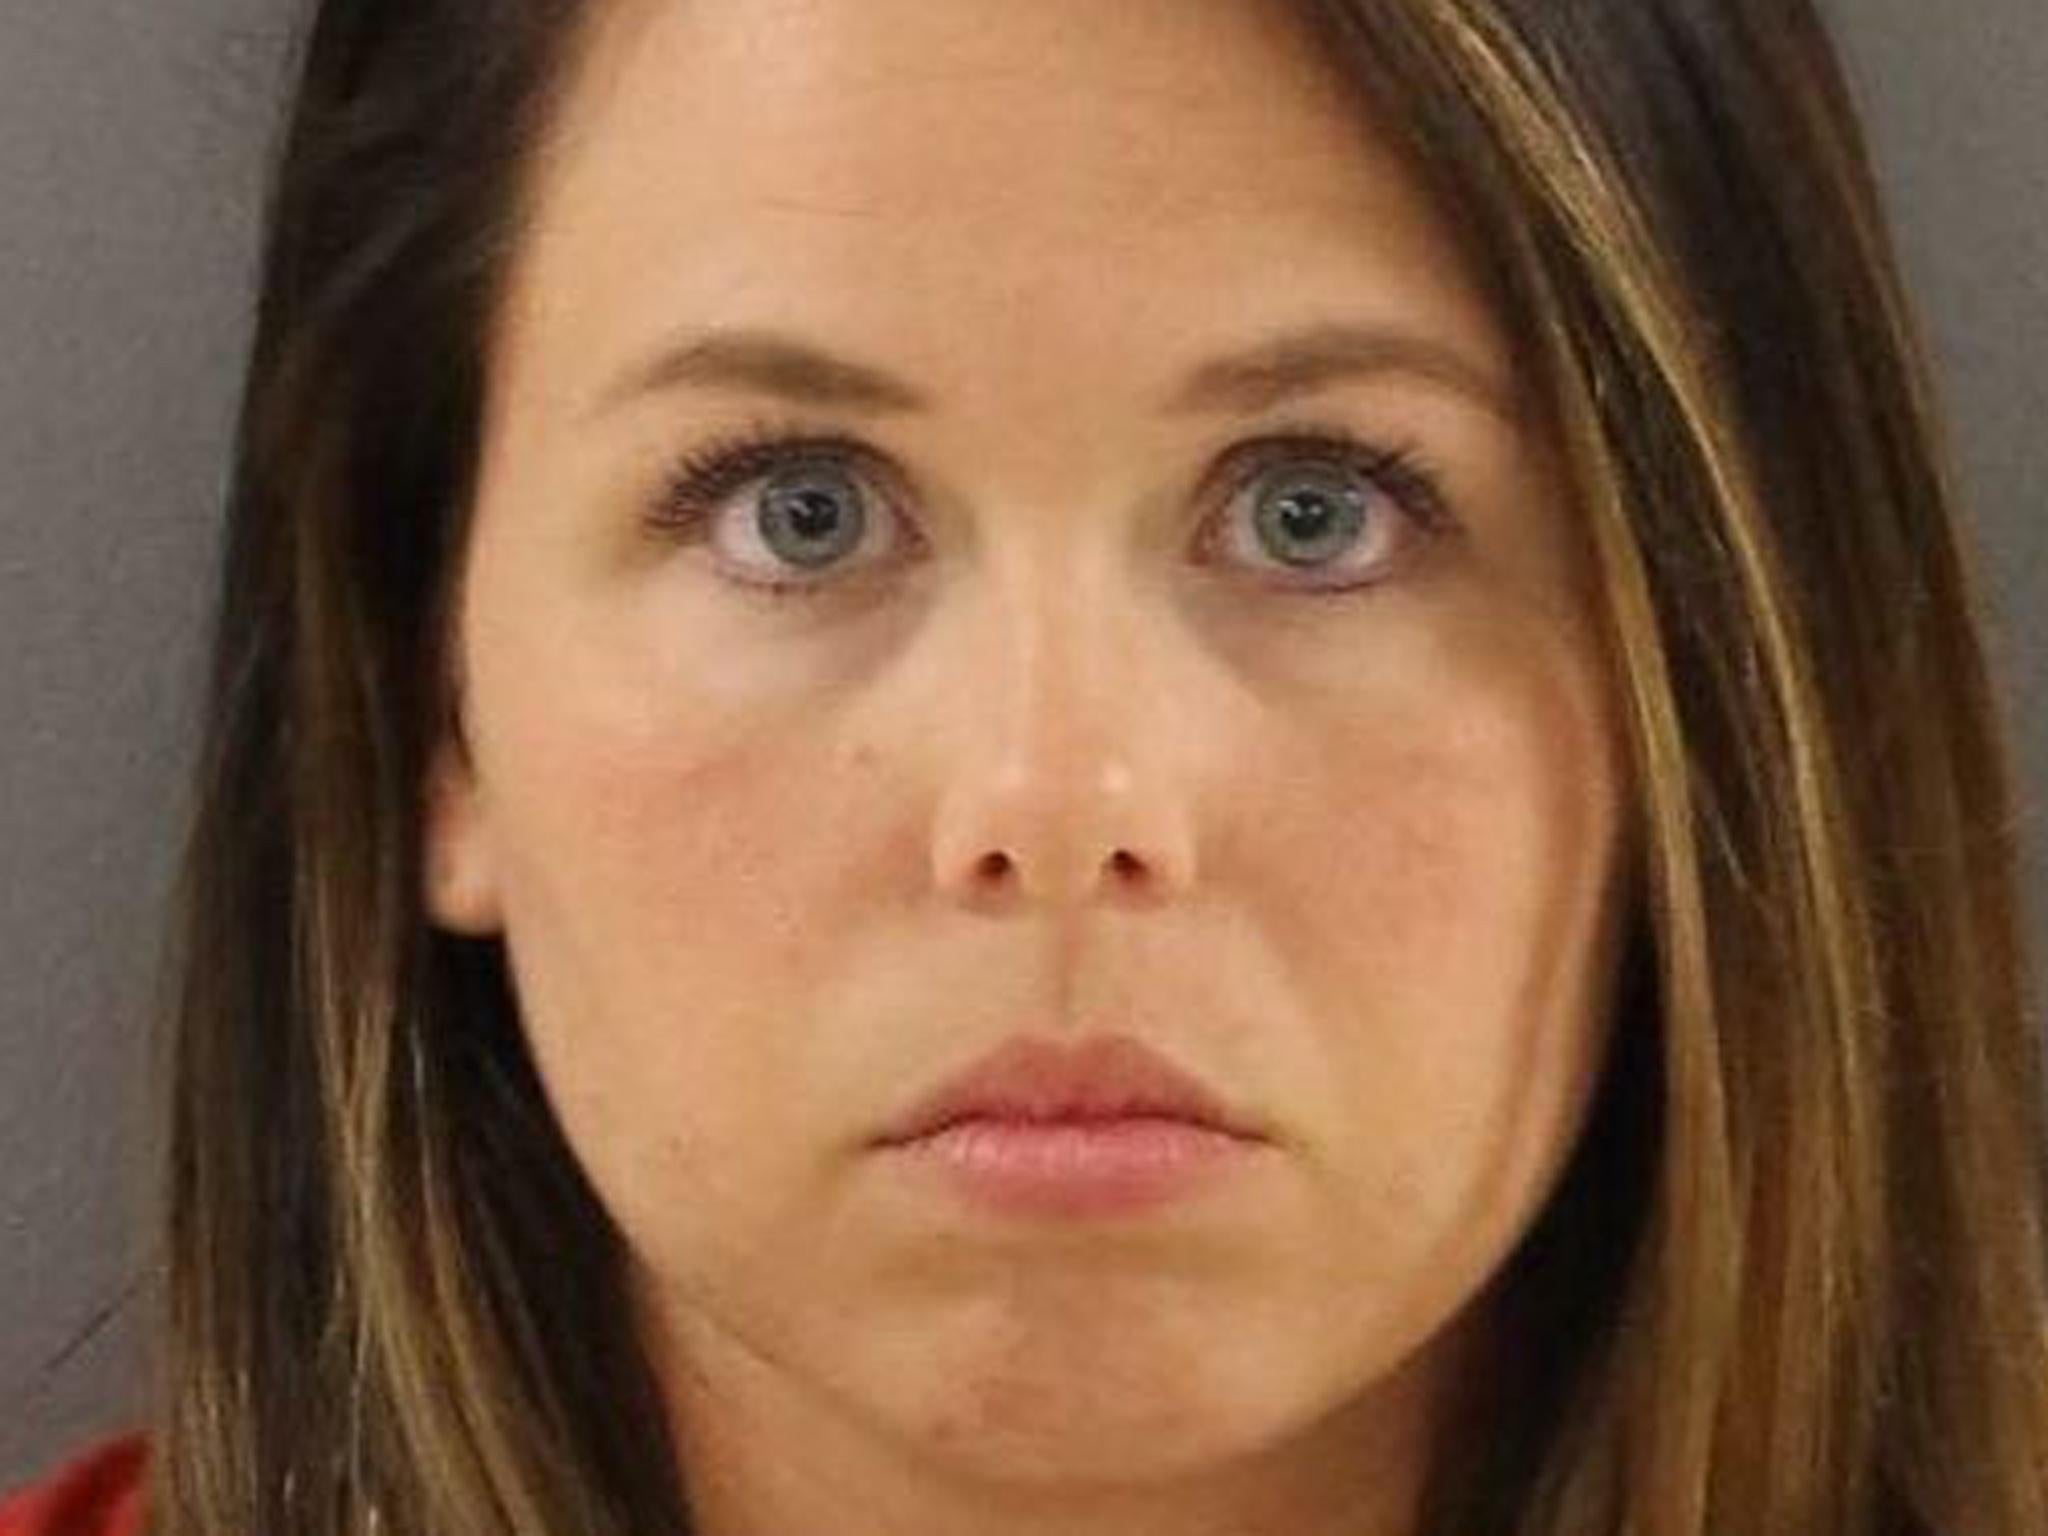 High school football coachs wife pleads guilty to having sex with 16-year- old team member The Independent The Independent photo